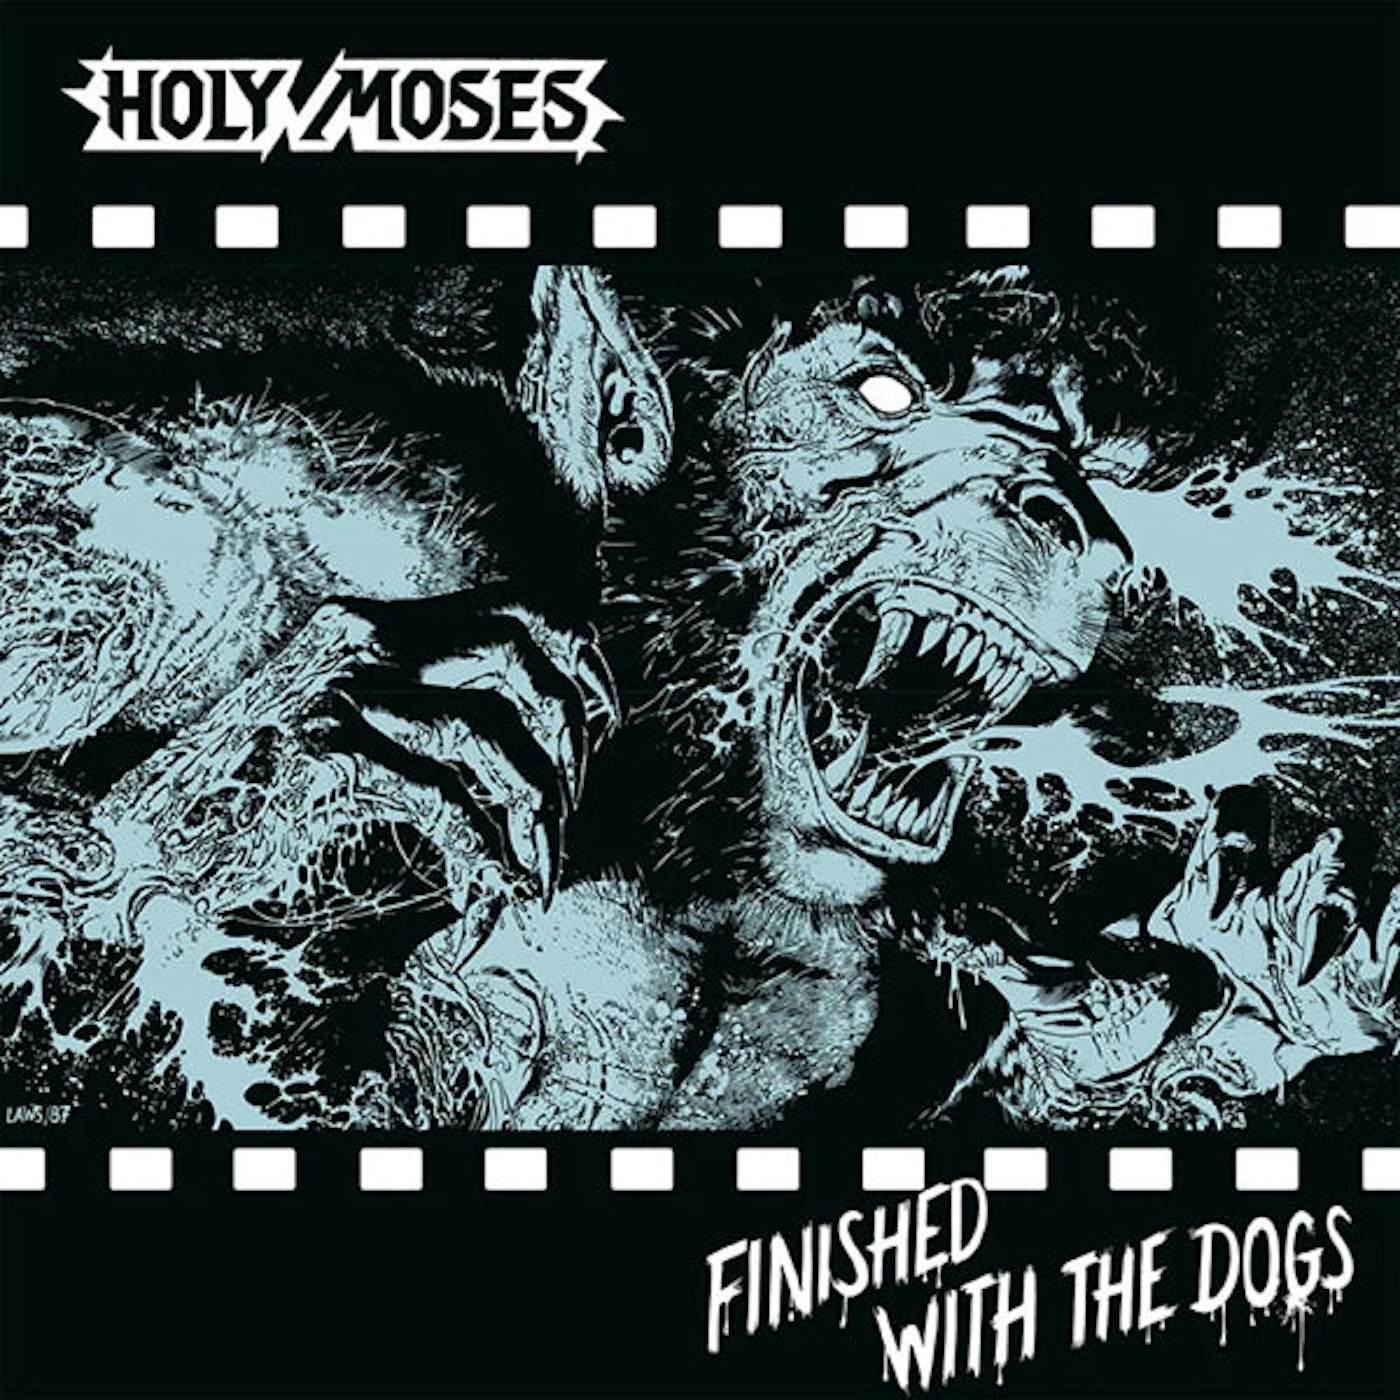 Holy Moses LP - Finished With The Dogs (Black Vinyl)